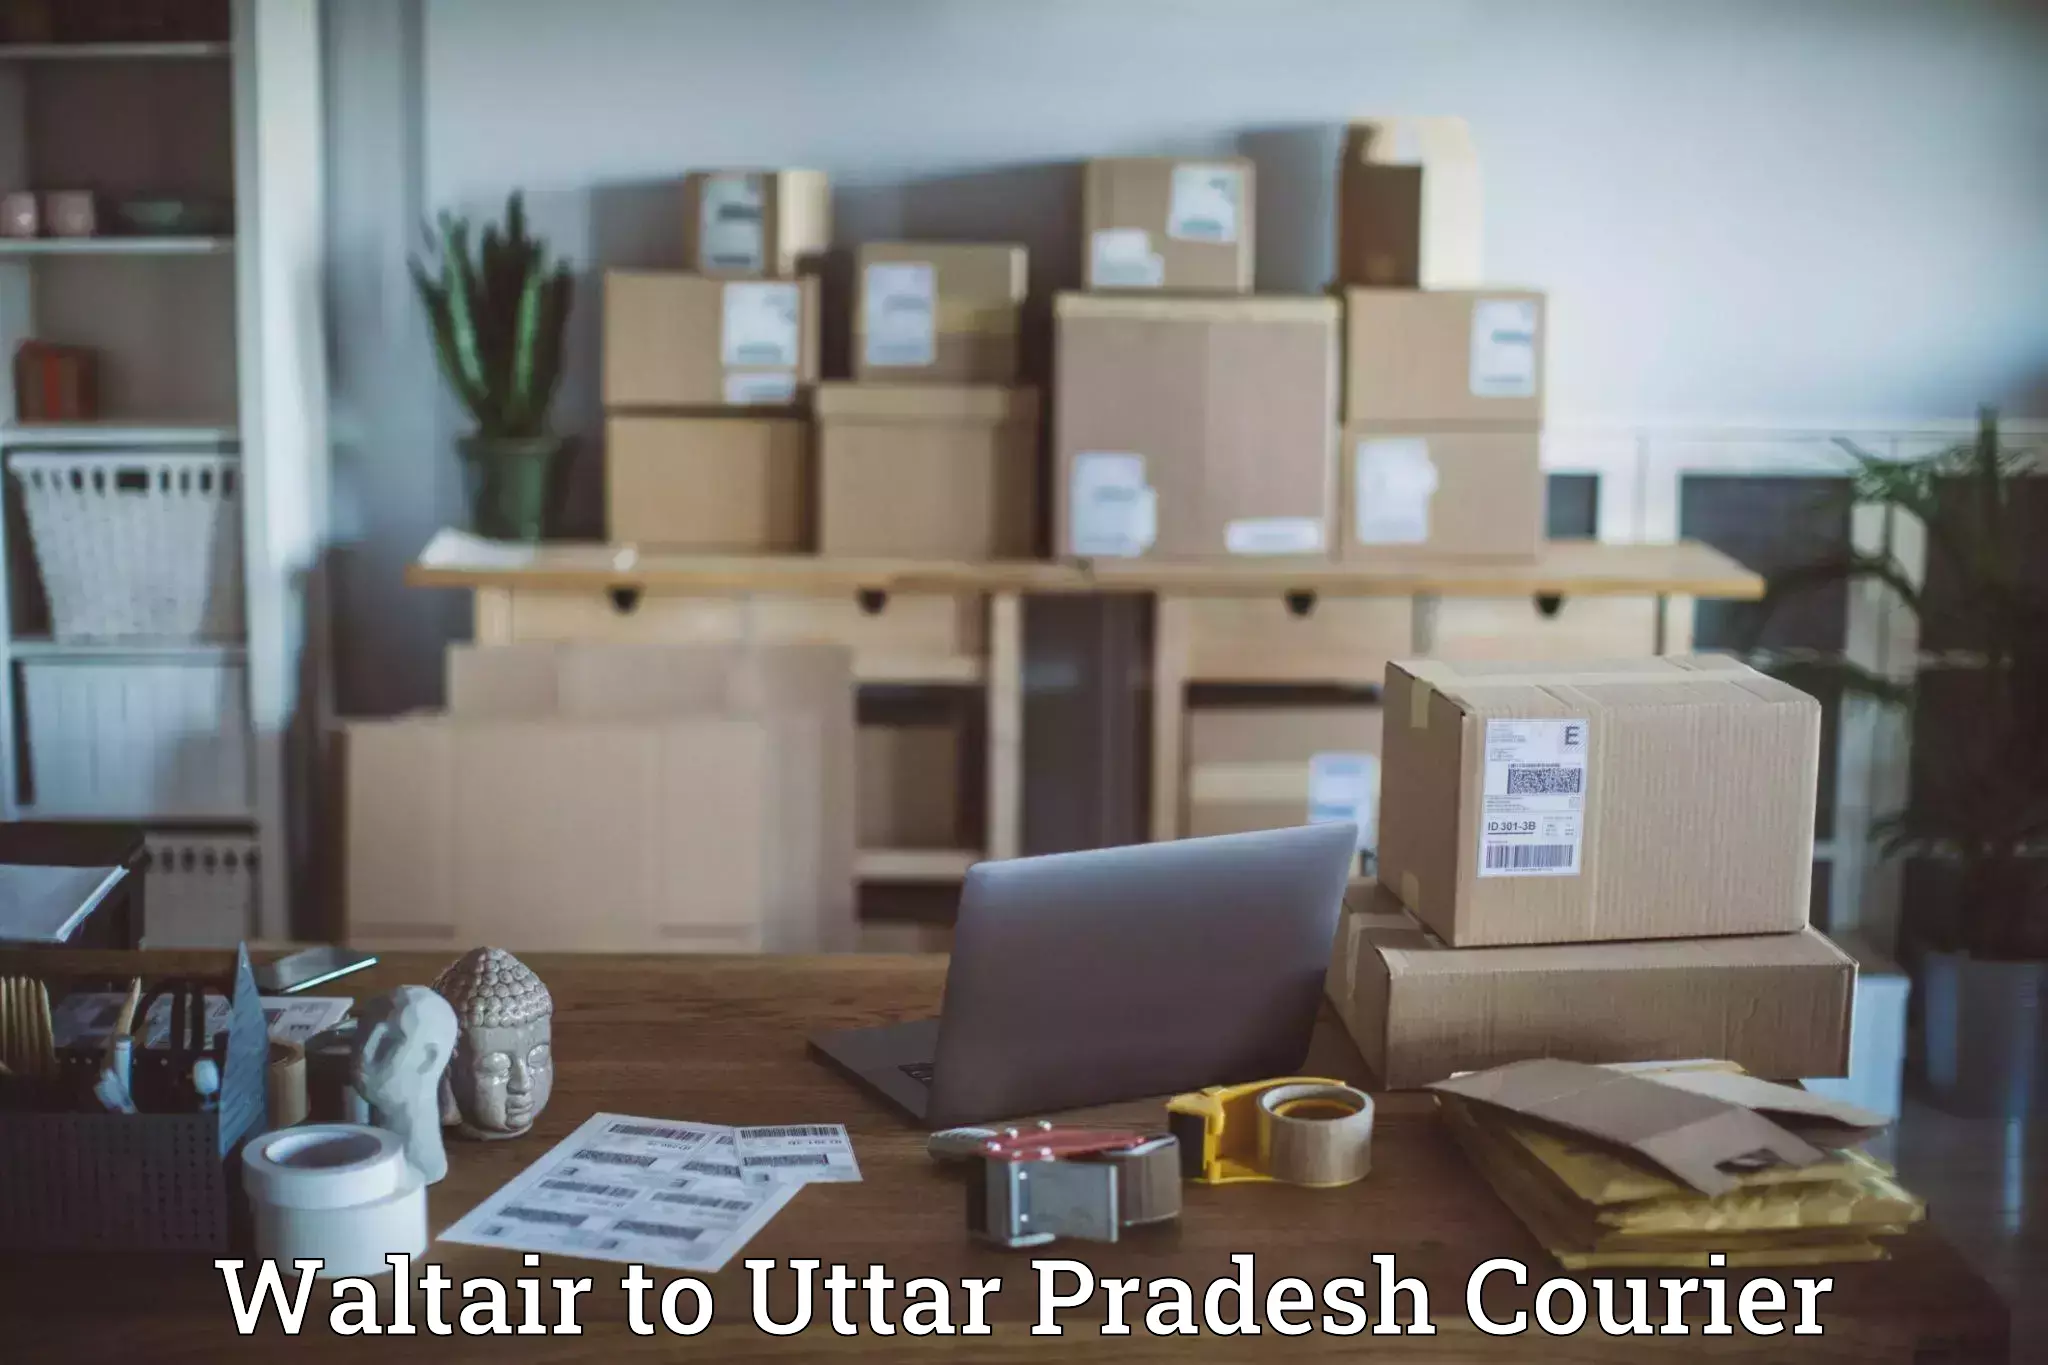 Easy access courier services Waltair to Amethi